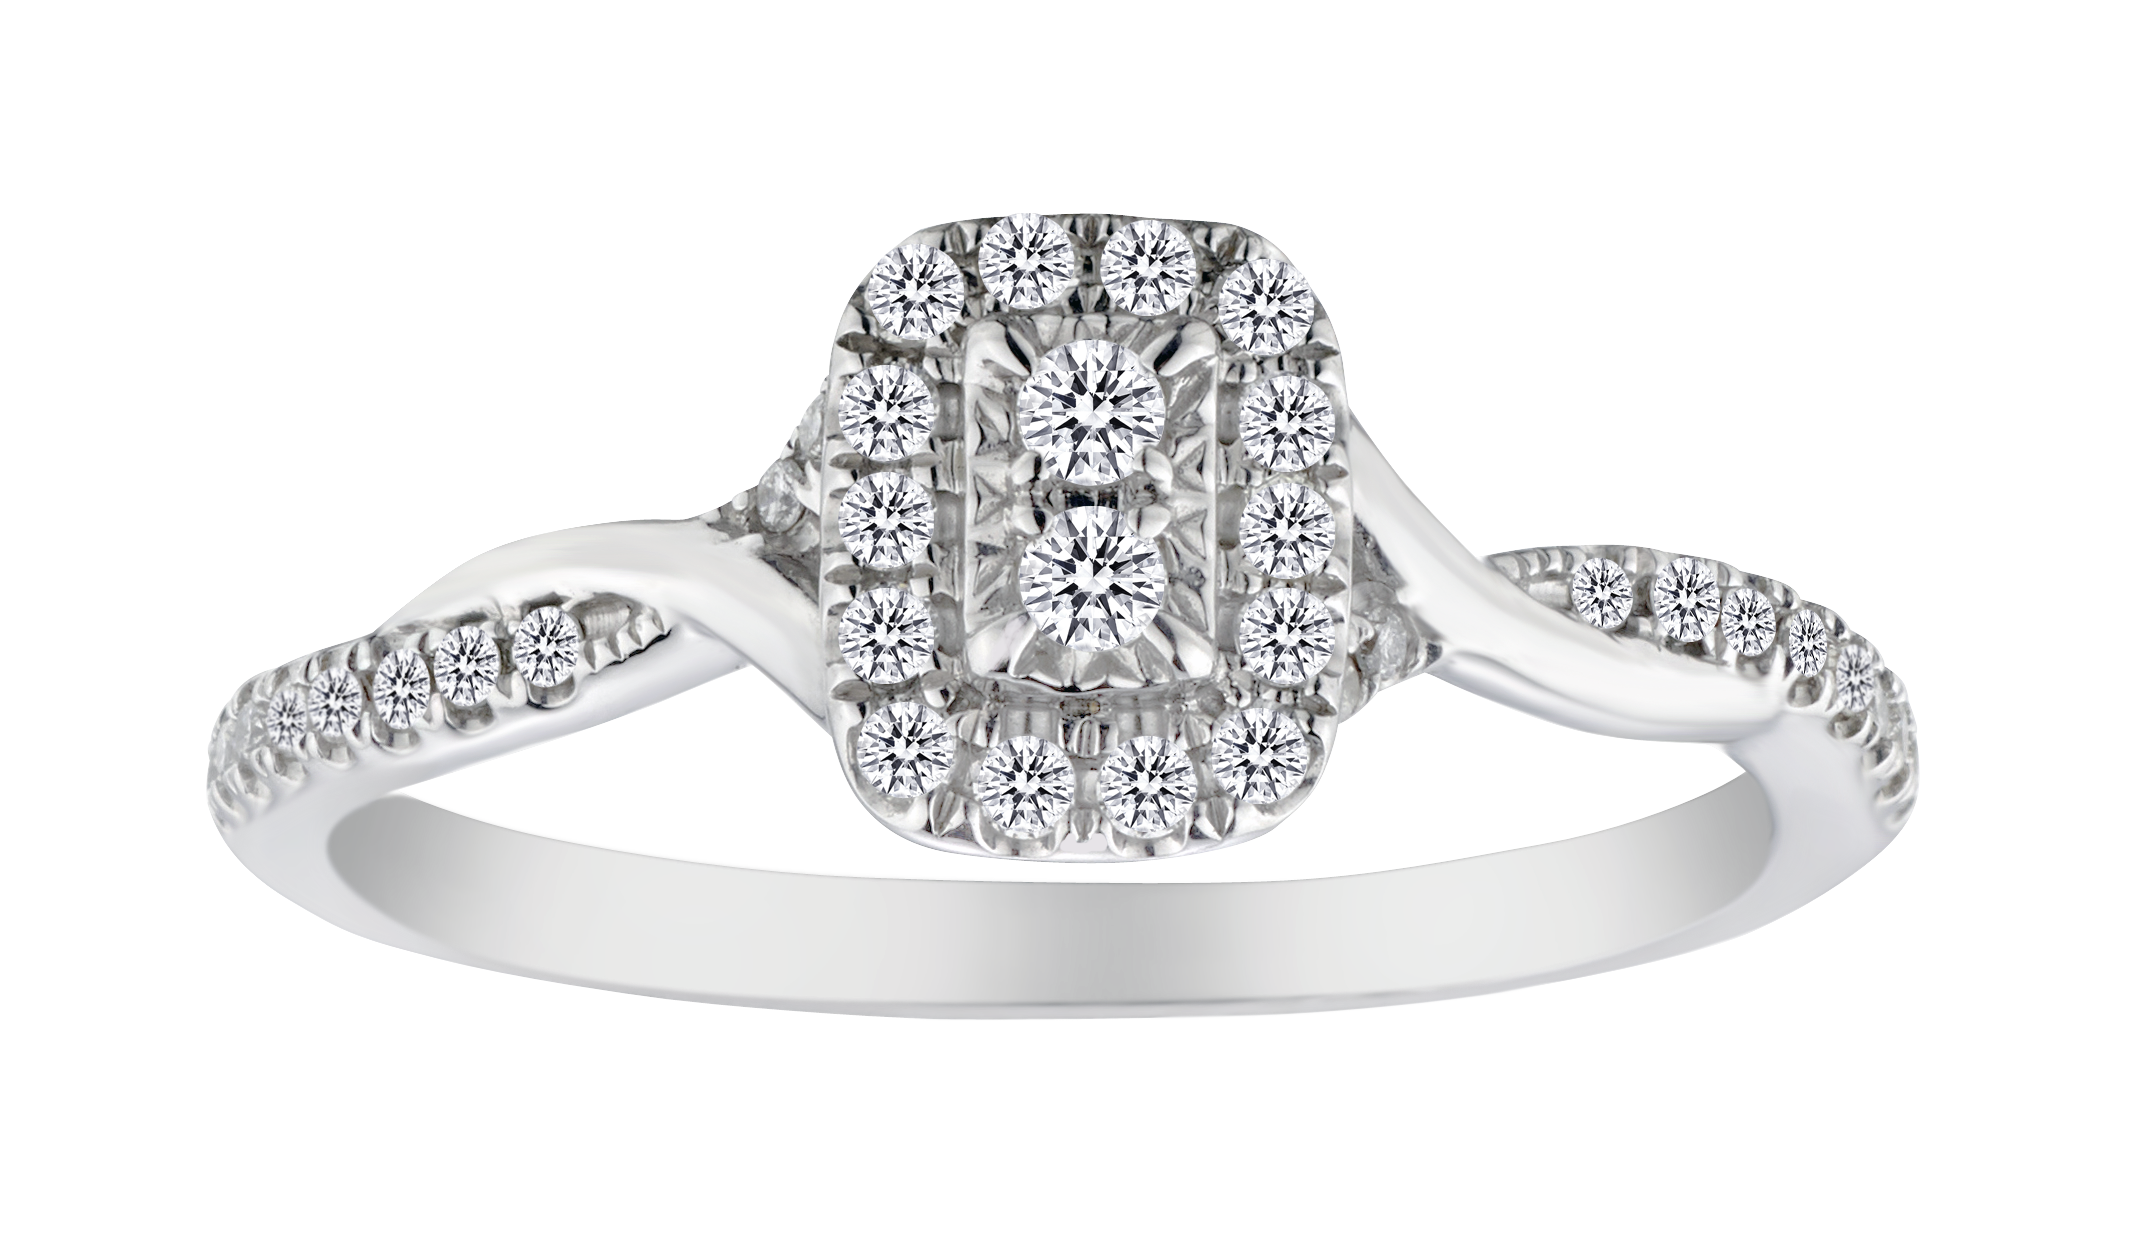 .25 Carat of Diamonds Engagement Halo Ring, 14kt White Gold.....................NOW